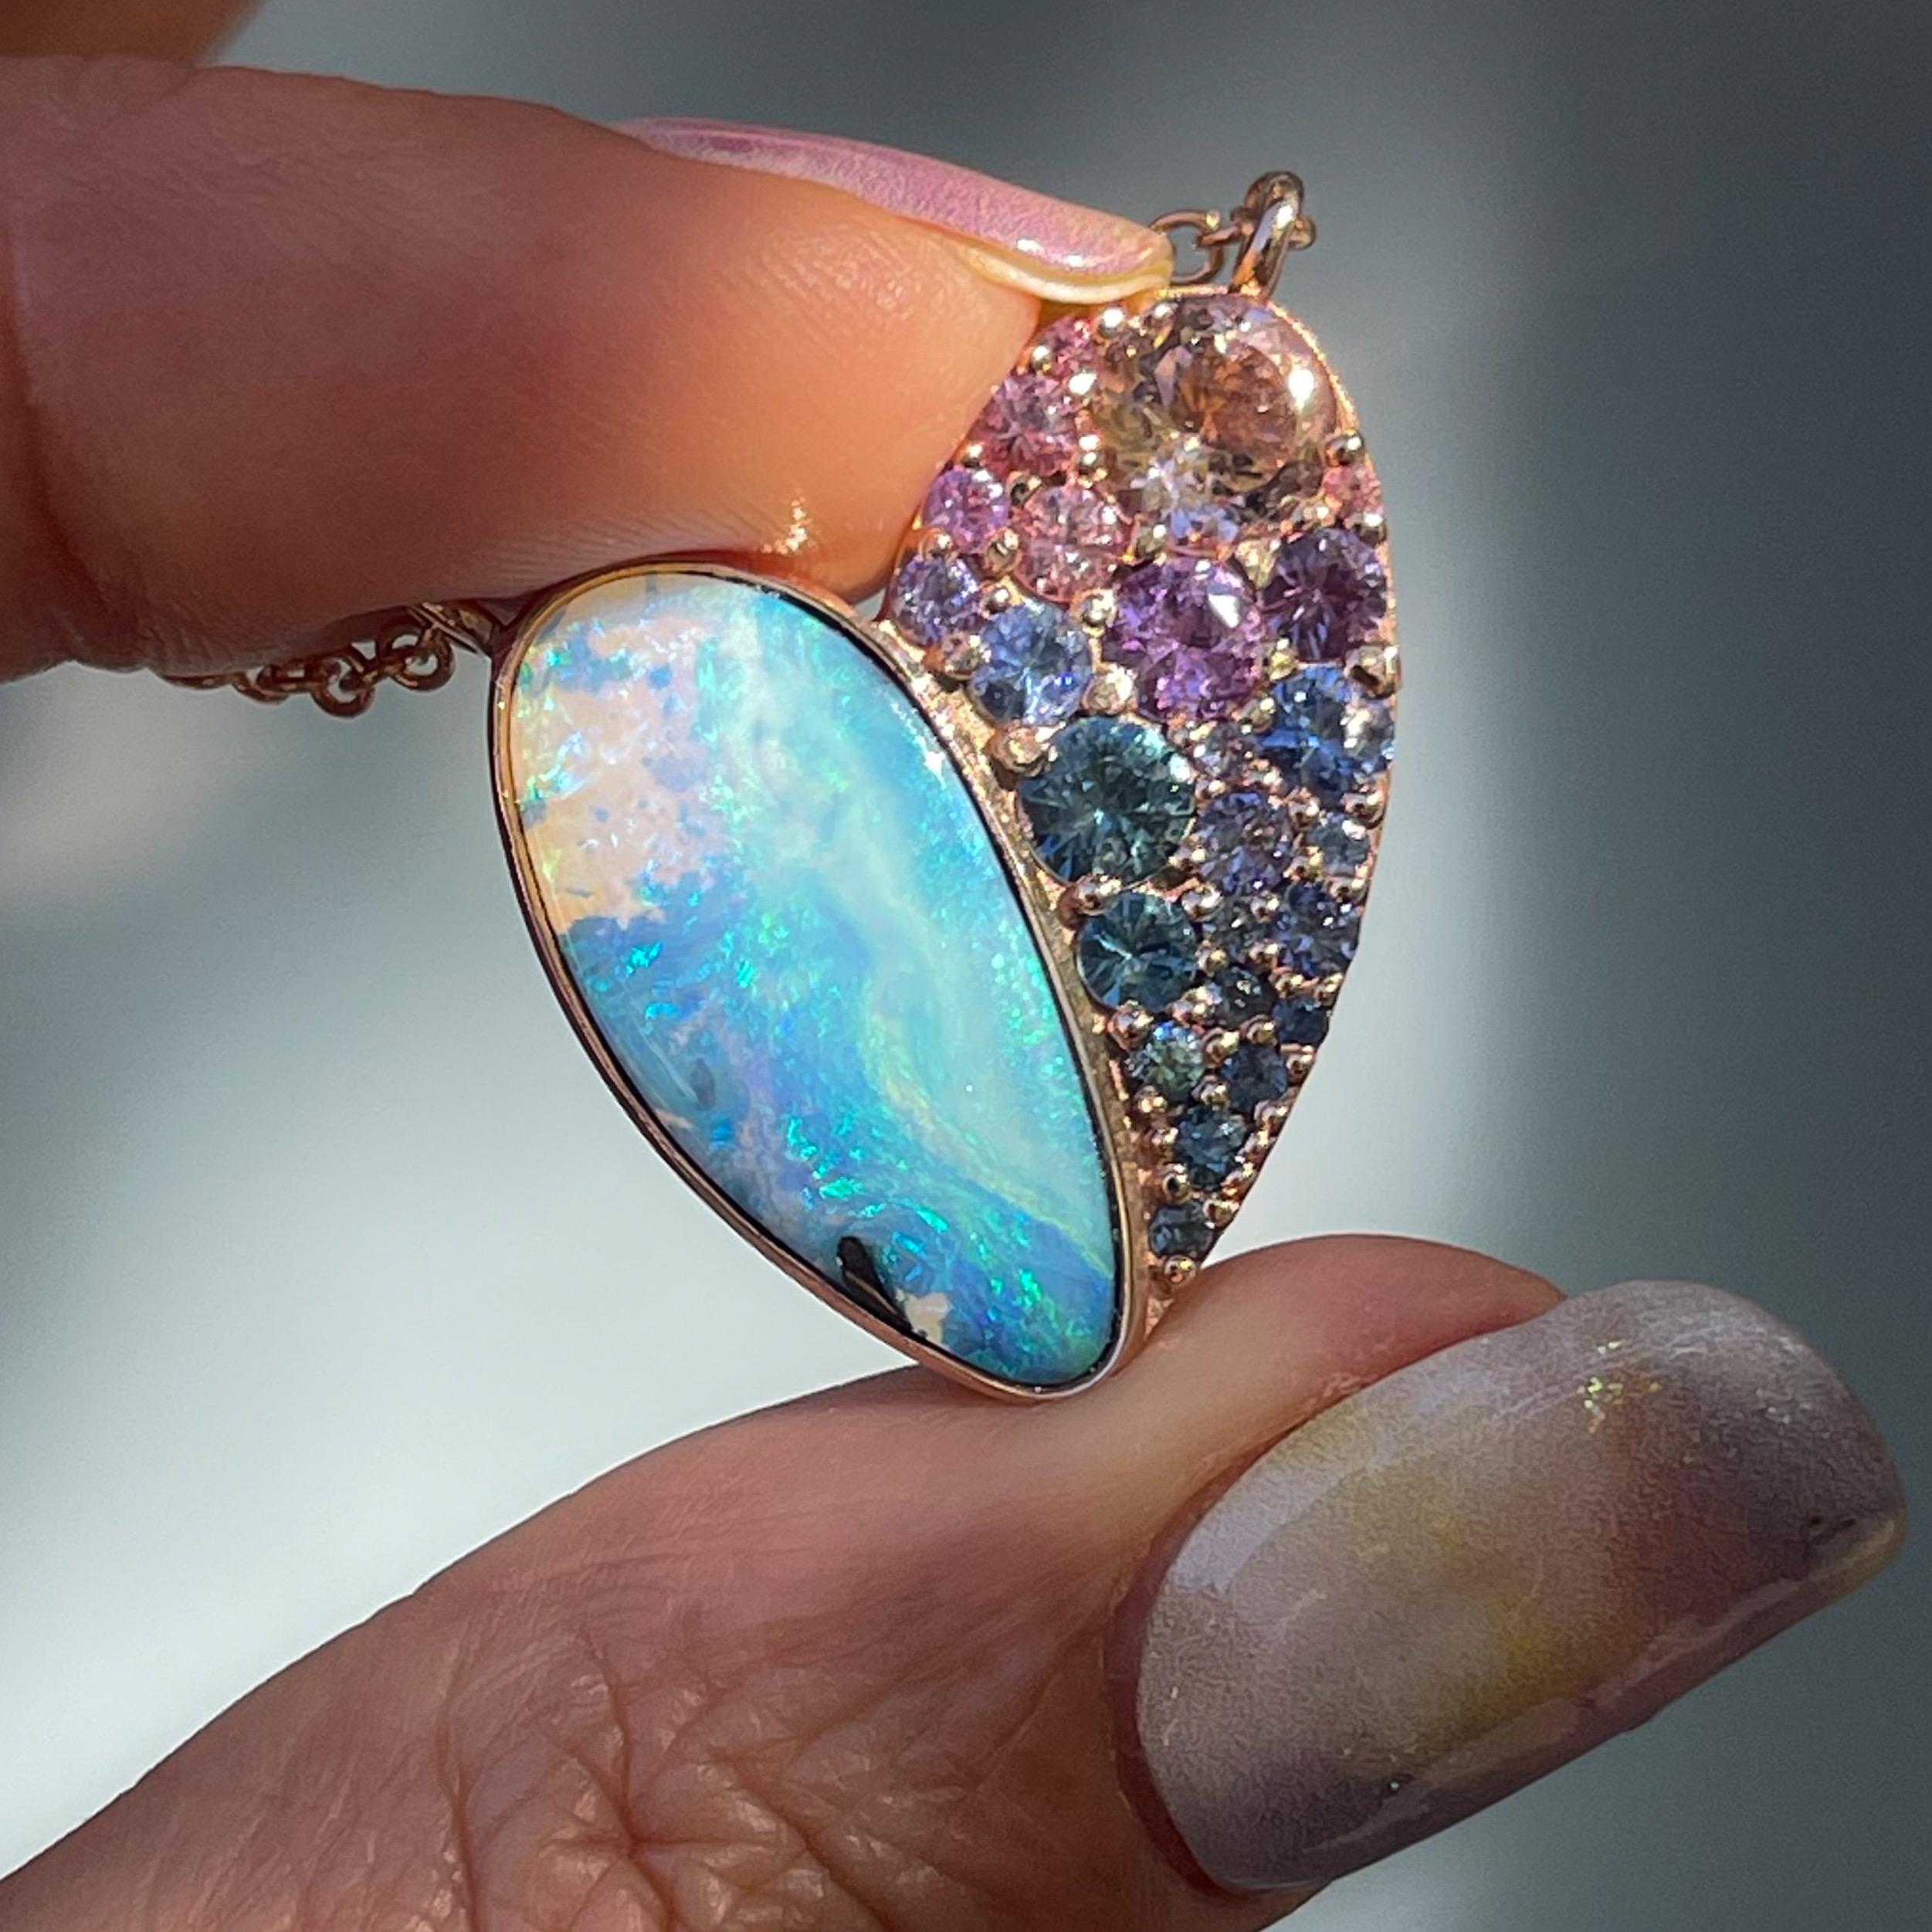 A chromatic mosaic delights the soul in this Heart Opal Necklace. Half Boulder Opal, half faceted gems, the choreographed heart necklace pulses with life. Inherent to the opal are a range of hues; from teal, cerulean, and periwinkle to lavender and